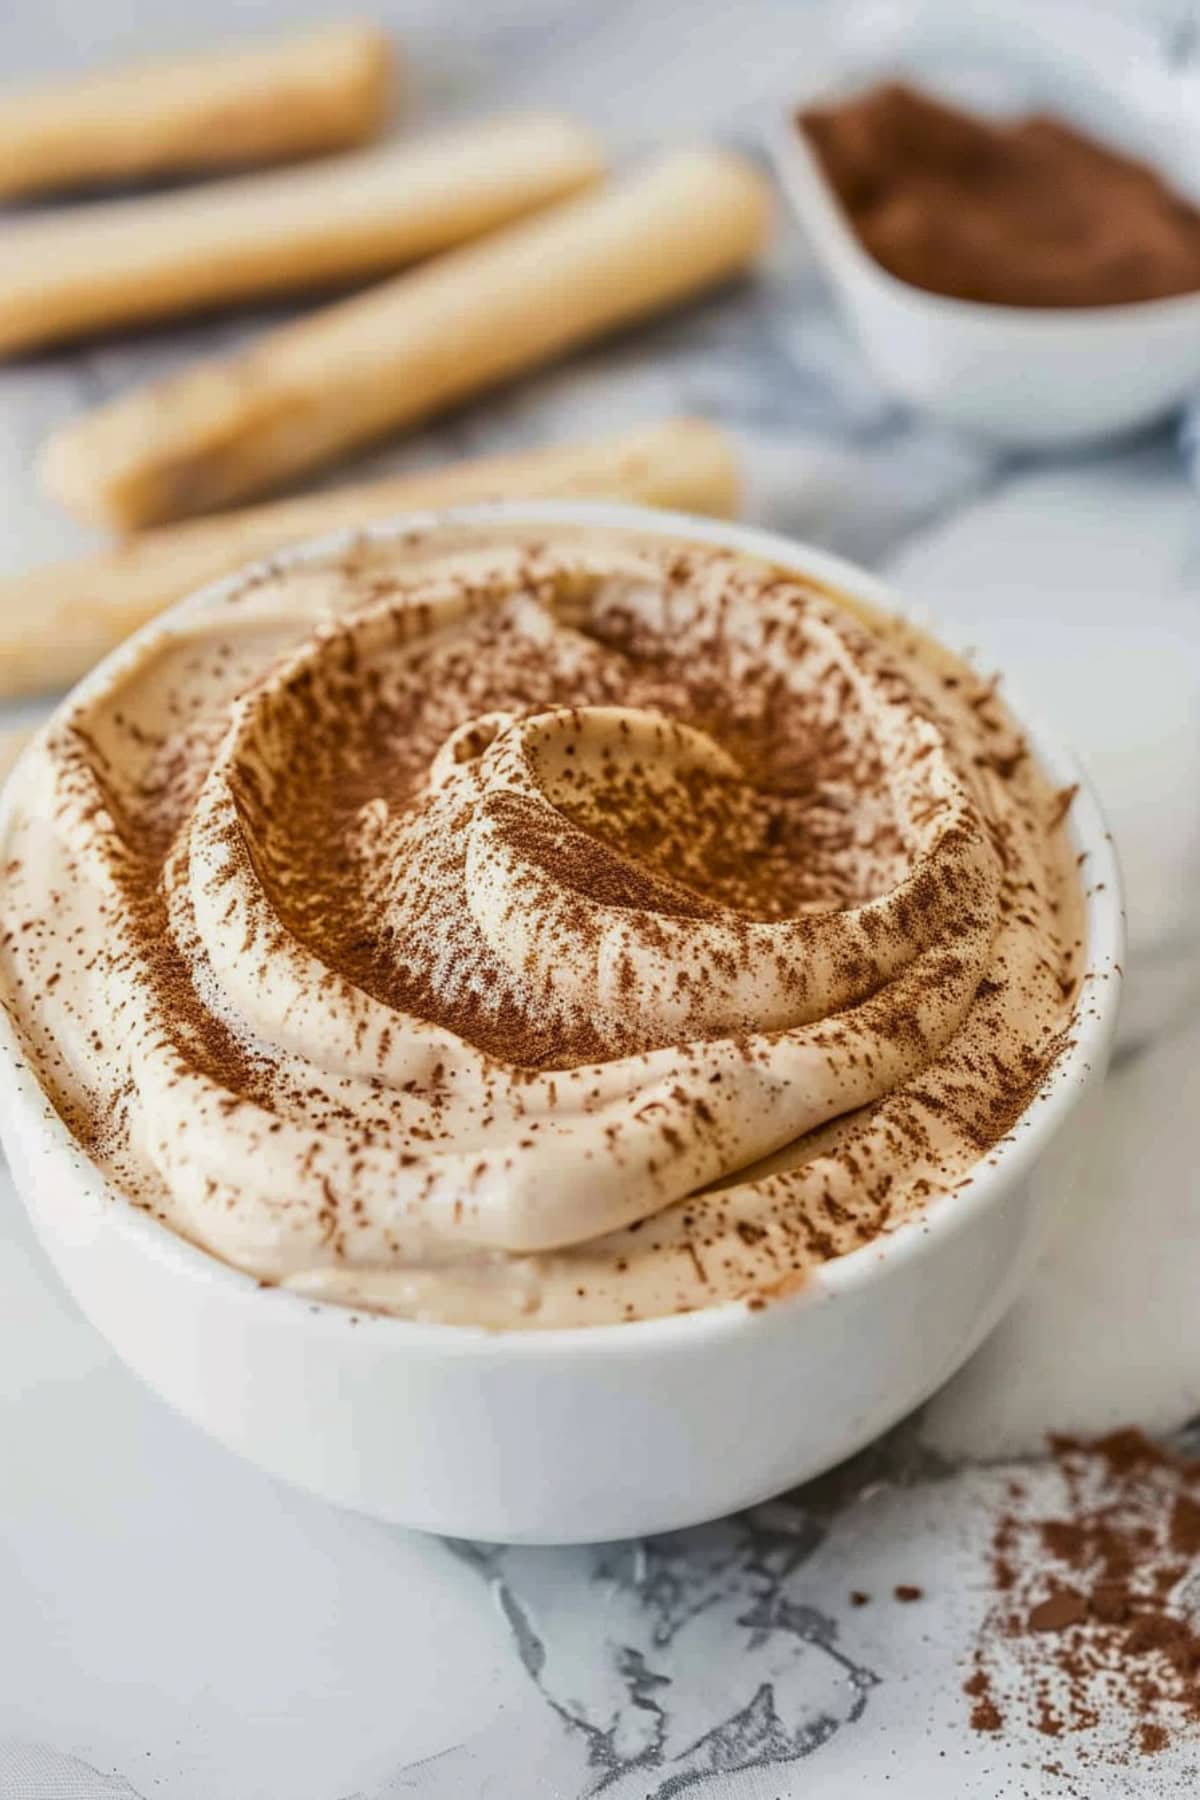 Tiramisu dip in a white bowl dusted with cocoa on top.